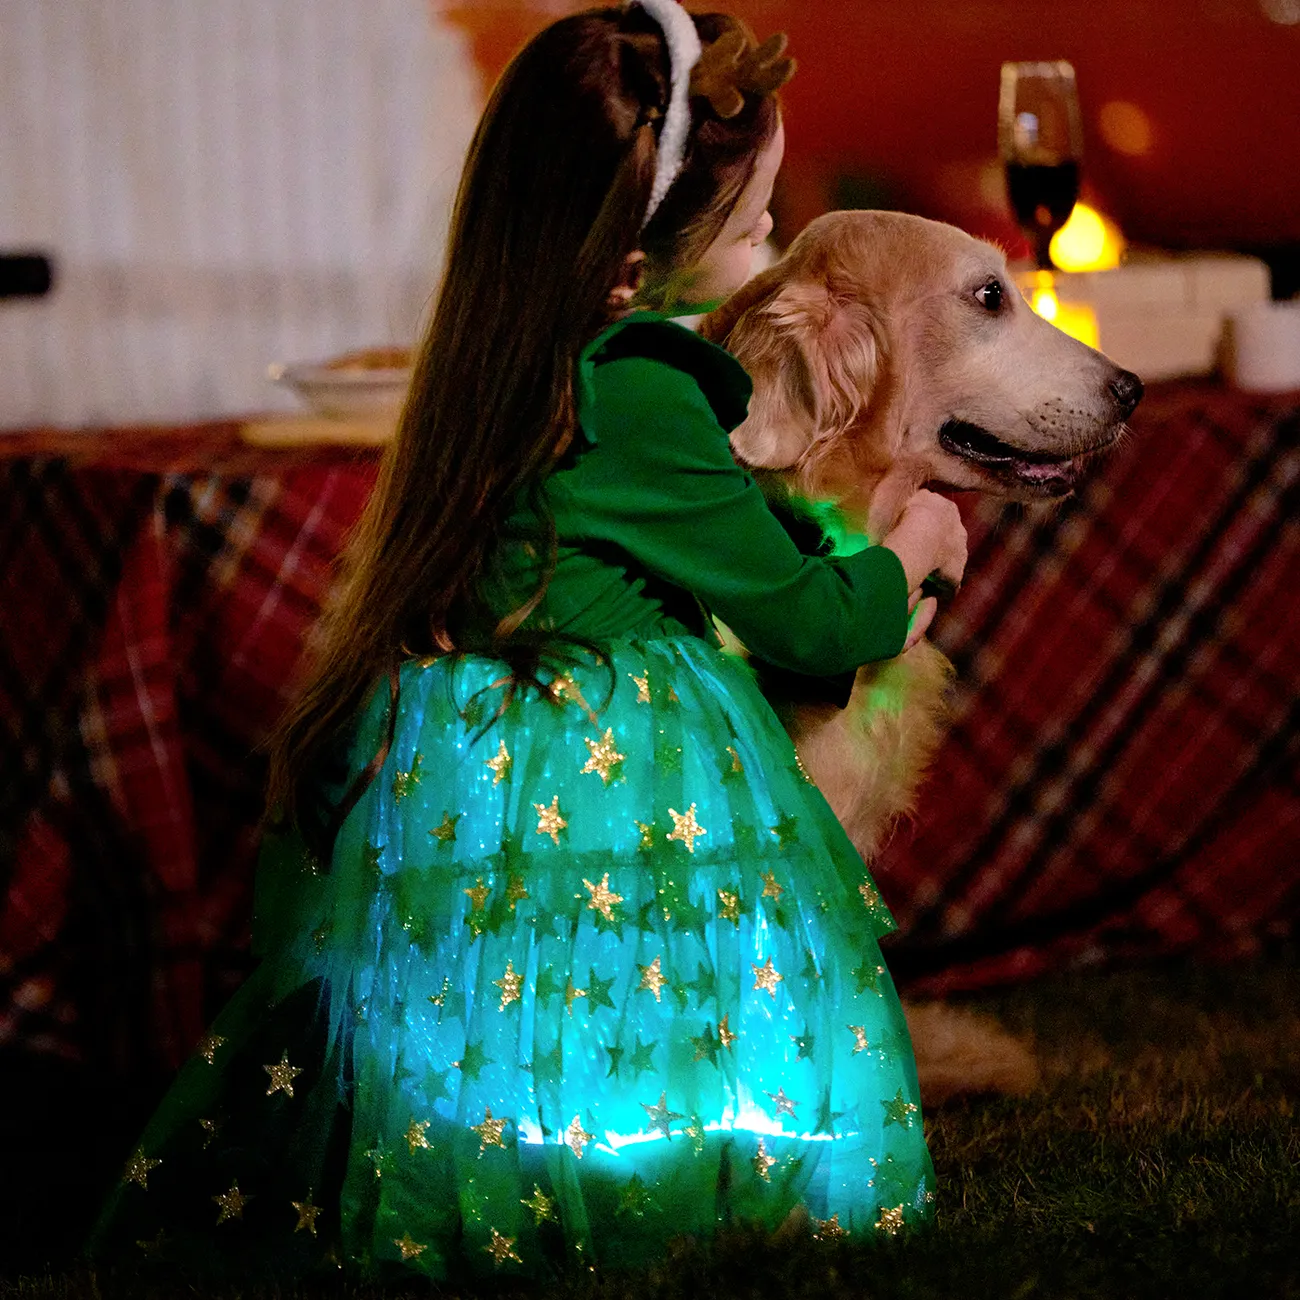 Go-Glow Christmas Family Matching Long-sleeve Tops with Christmas Tree glowing & Illuminating Dress with Light Up Skirt Including Controller (Built-In Battery) Green big image 1